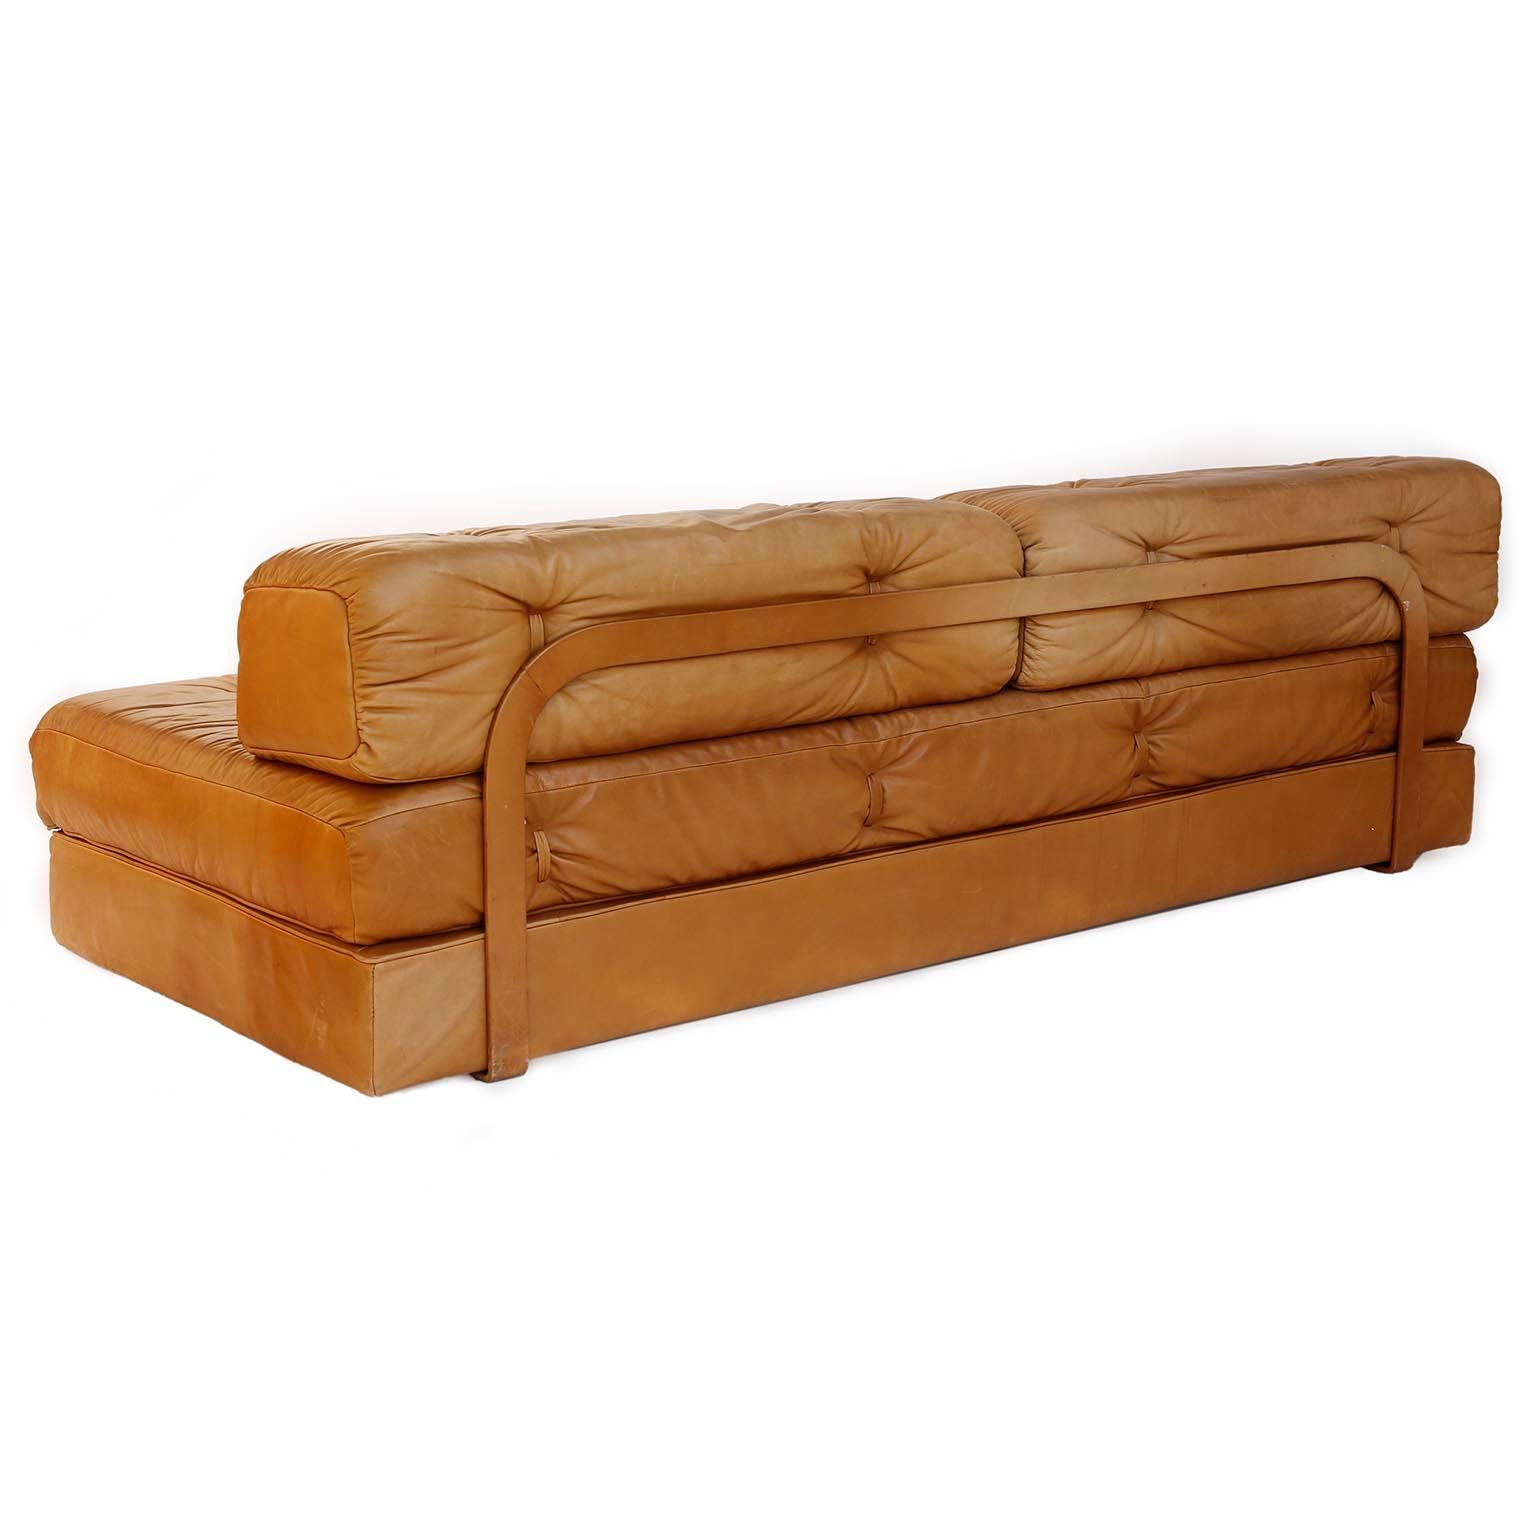 Pair of Chairs Convertable Bed Daybed Sofa 'Atrium', Wittmann, Cognac Leather 10